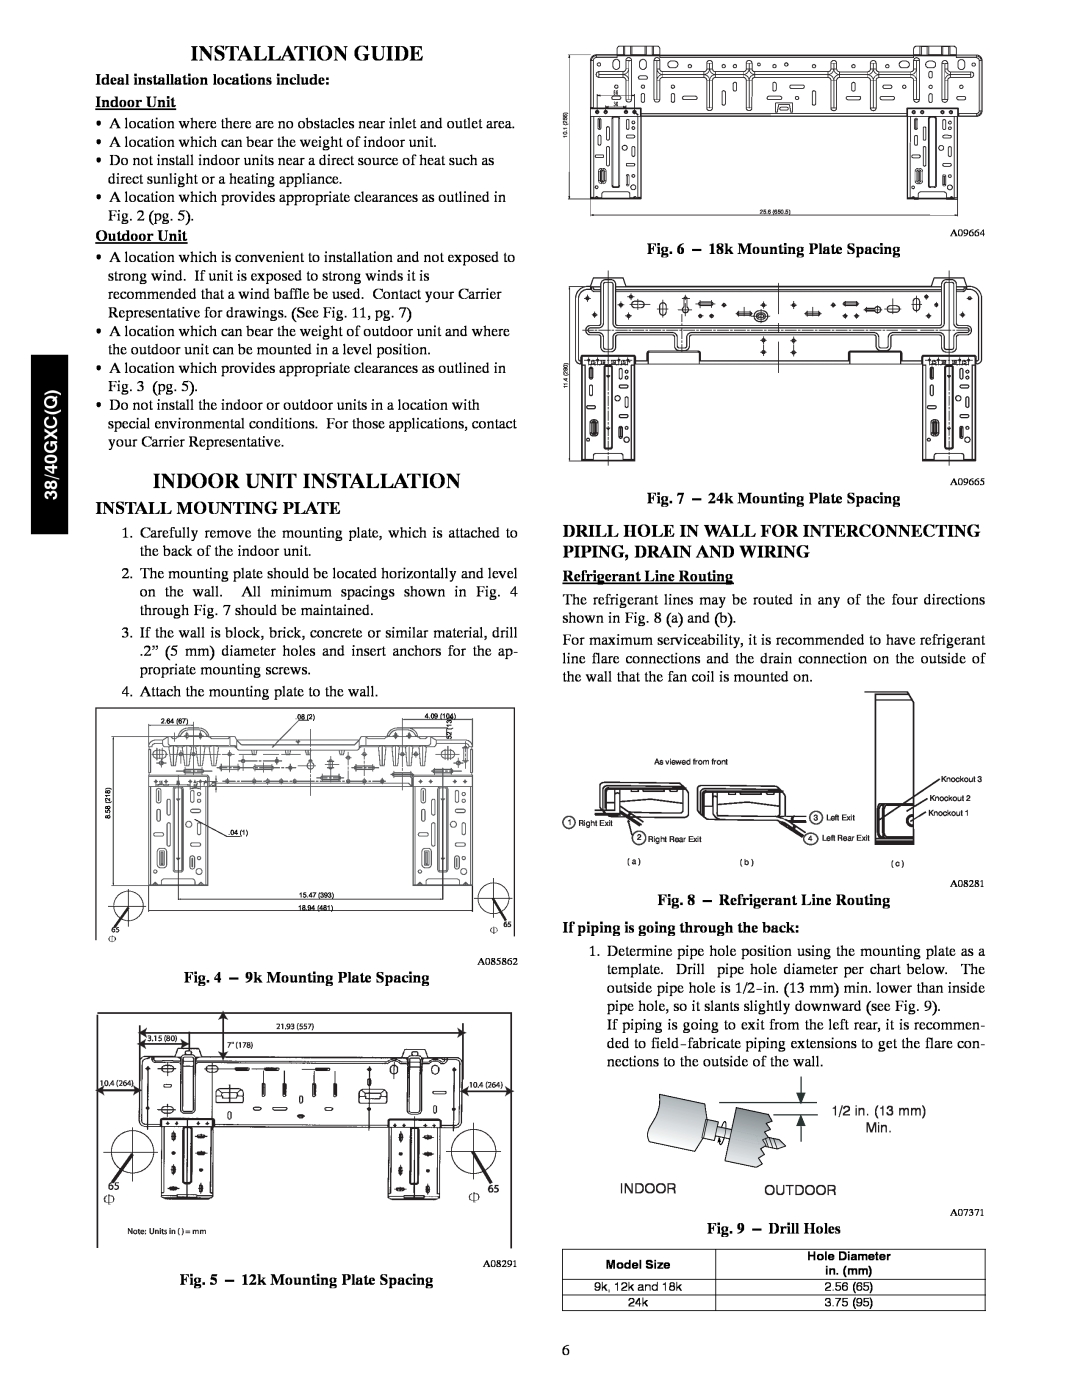 Carrier 38GXQ Installation Guide, Indoor Unit Installation, Install Mounting Plate, Outdoor Unit, Refrigerant Line Routing 